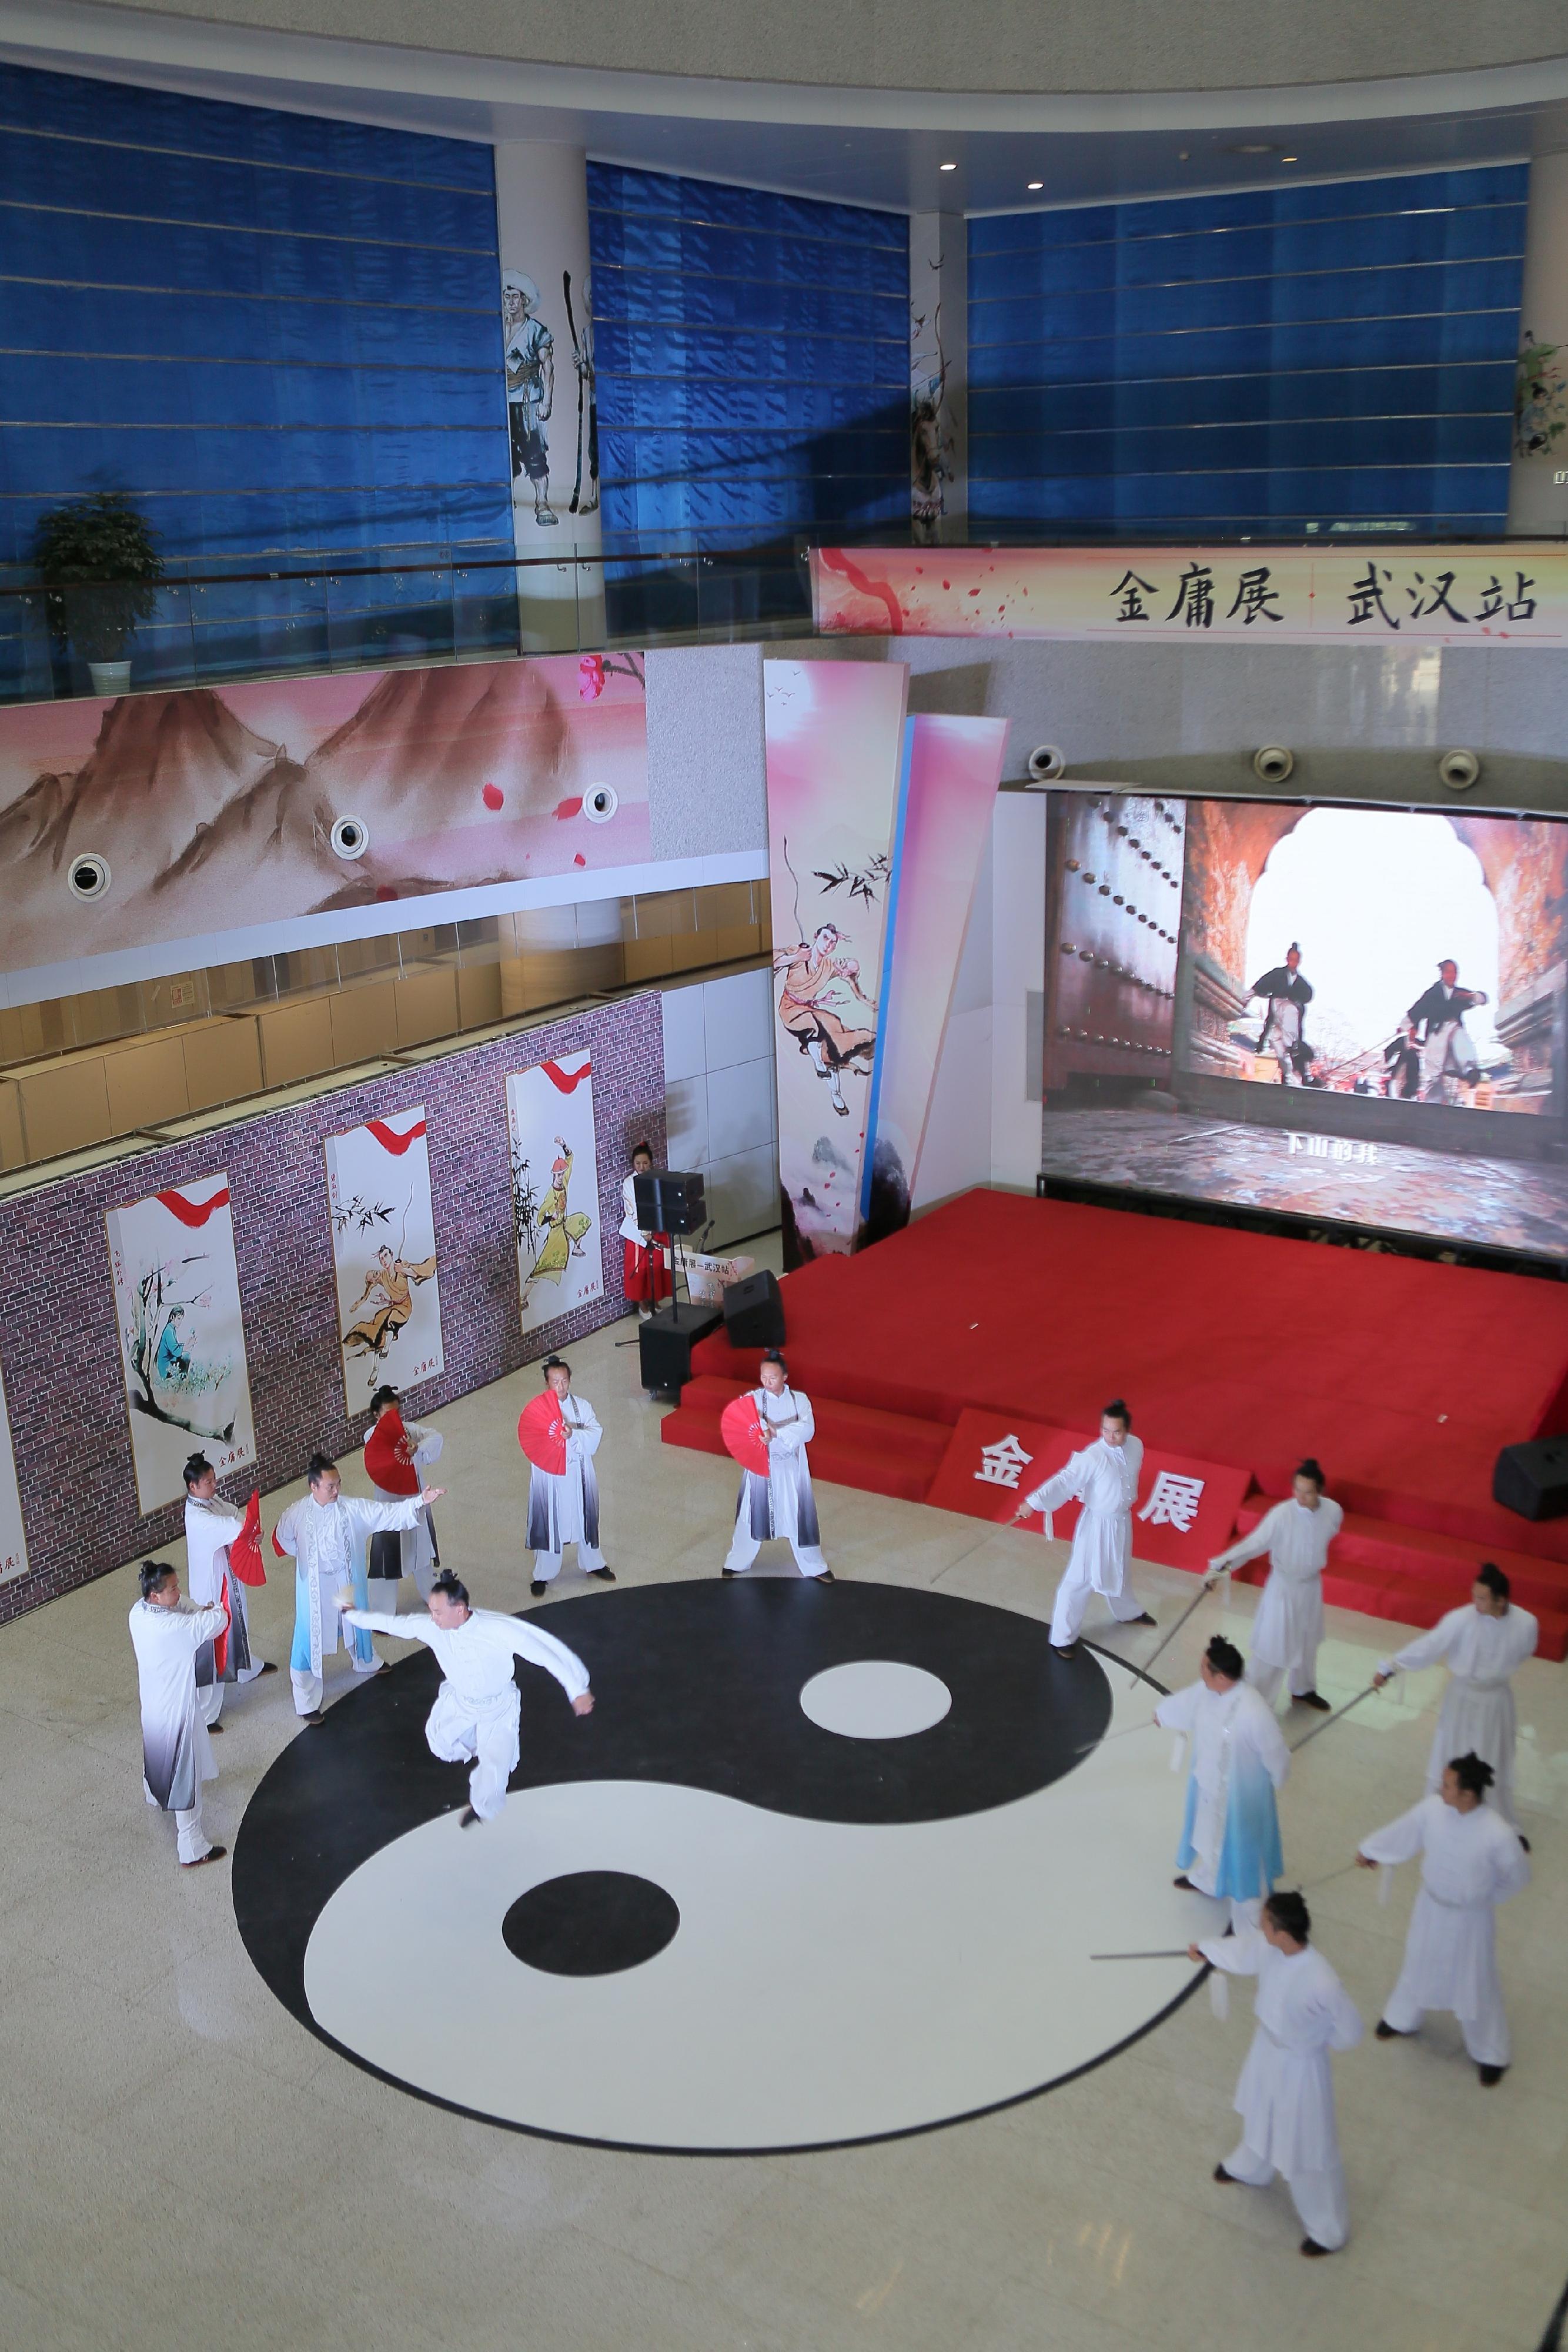 A themed exhibition on the veteran journalist and renowned writer, Dr Louis Cha (pen name Jin Yong), was officially opened today (September 9) at the Hubei Provincial Library in Wuhan. Photo shows Tai Chi performances at the opening ceremony of the Jin Yong exhibition.